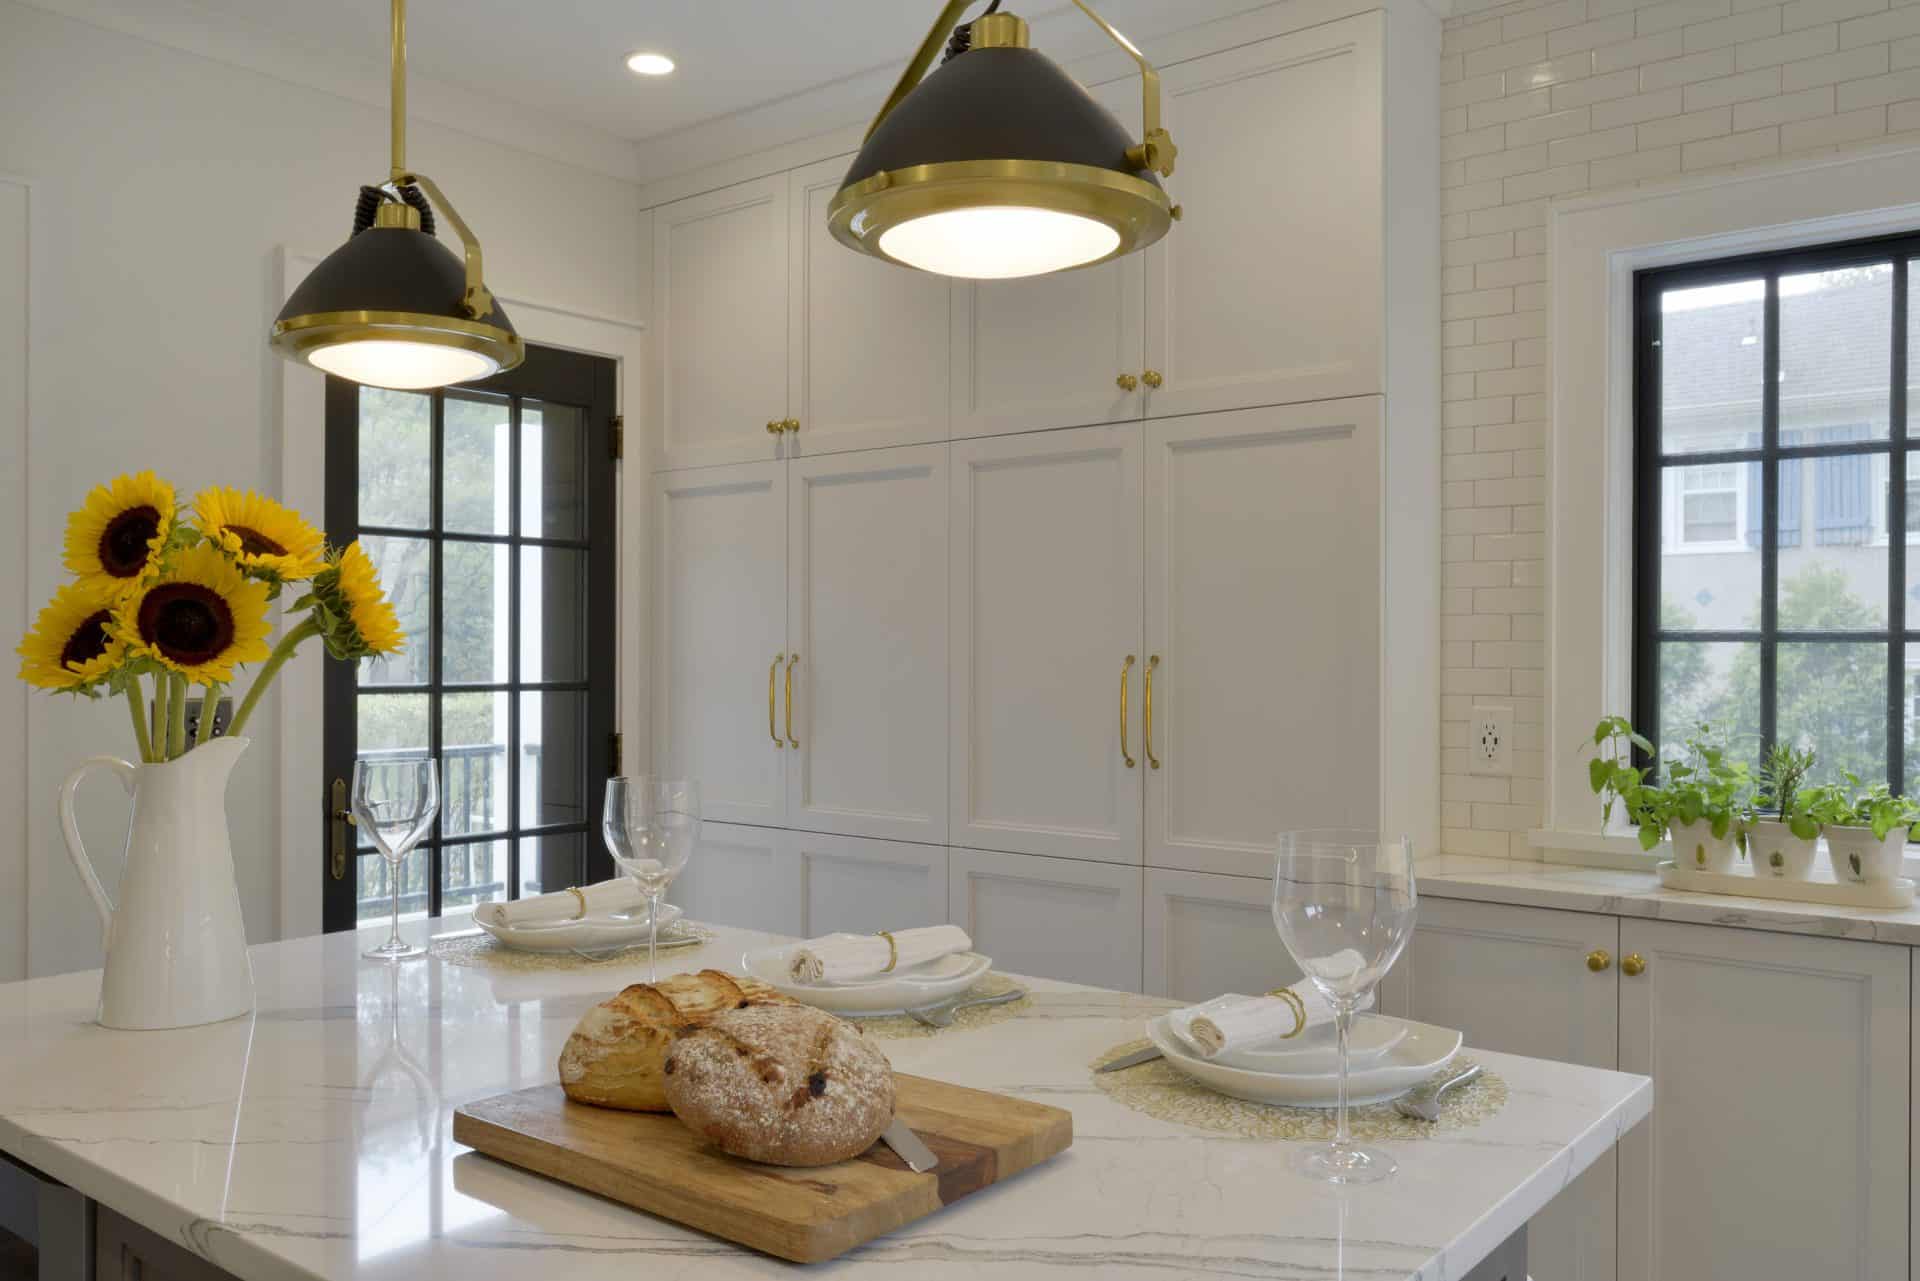 Kitchen in Tarrytown NY features White NNAC cabinetry and black and gold accents